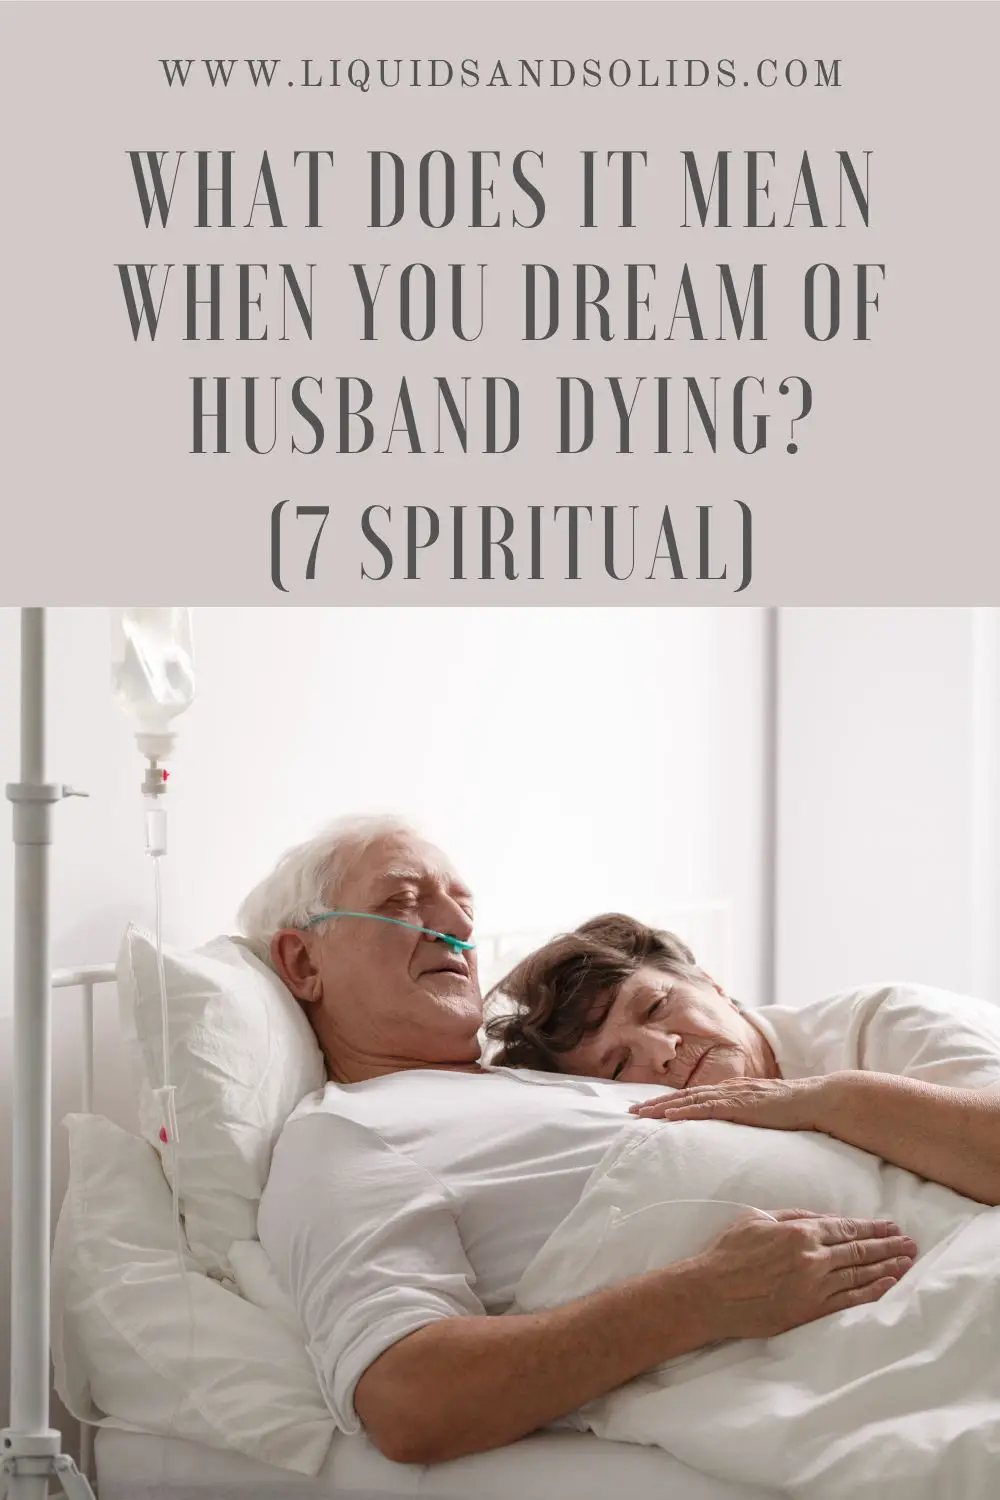 Dreams Of Dead Husband With Another Woman